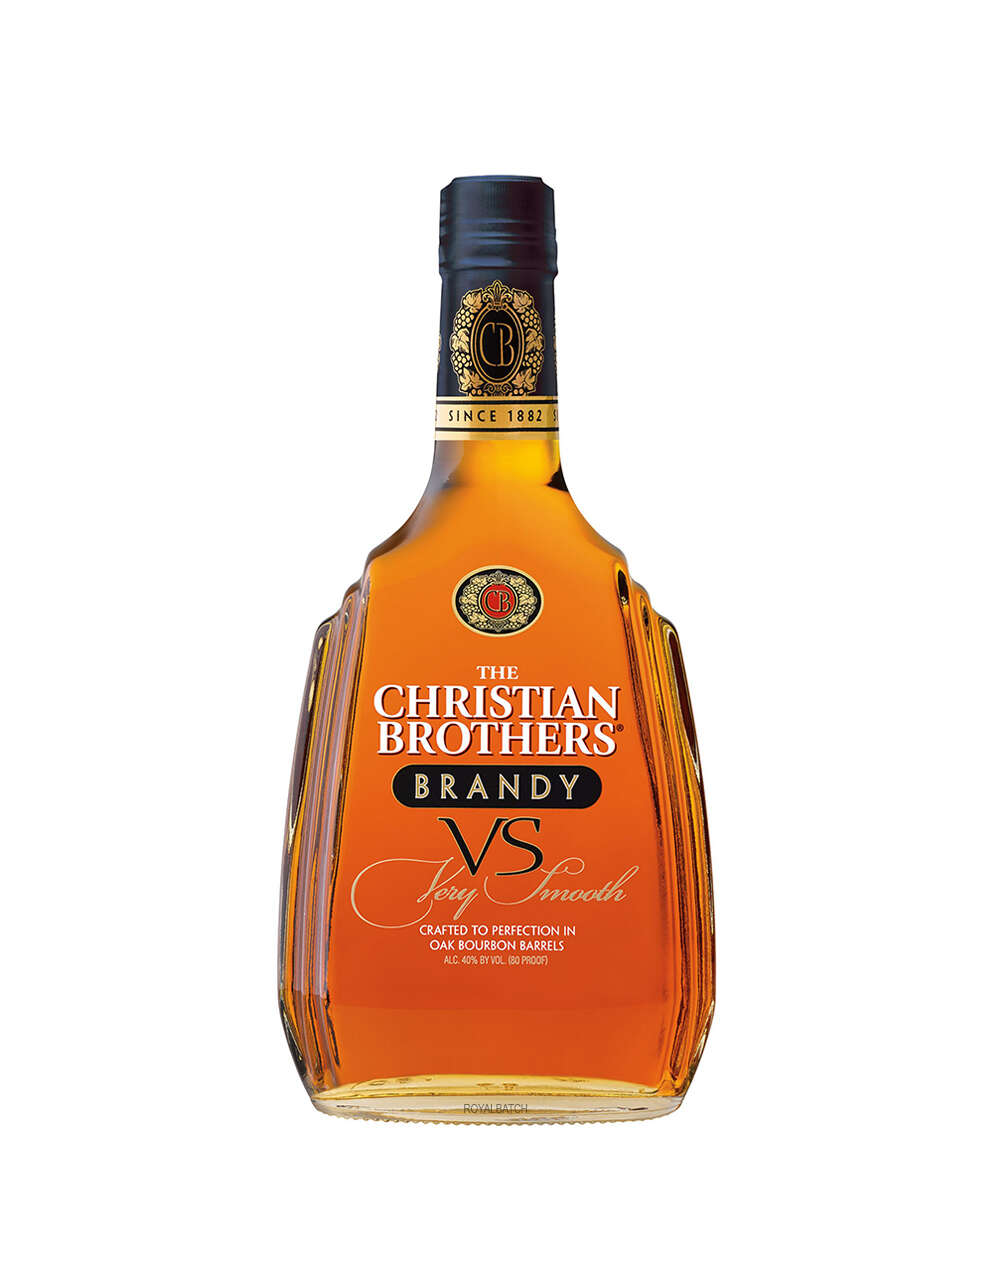 The Christian Brothers VS Very Smooth Brandy 1.75L